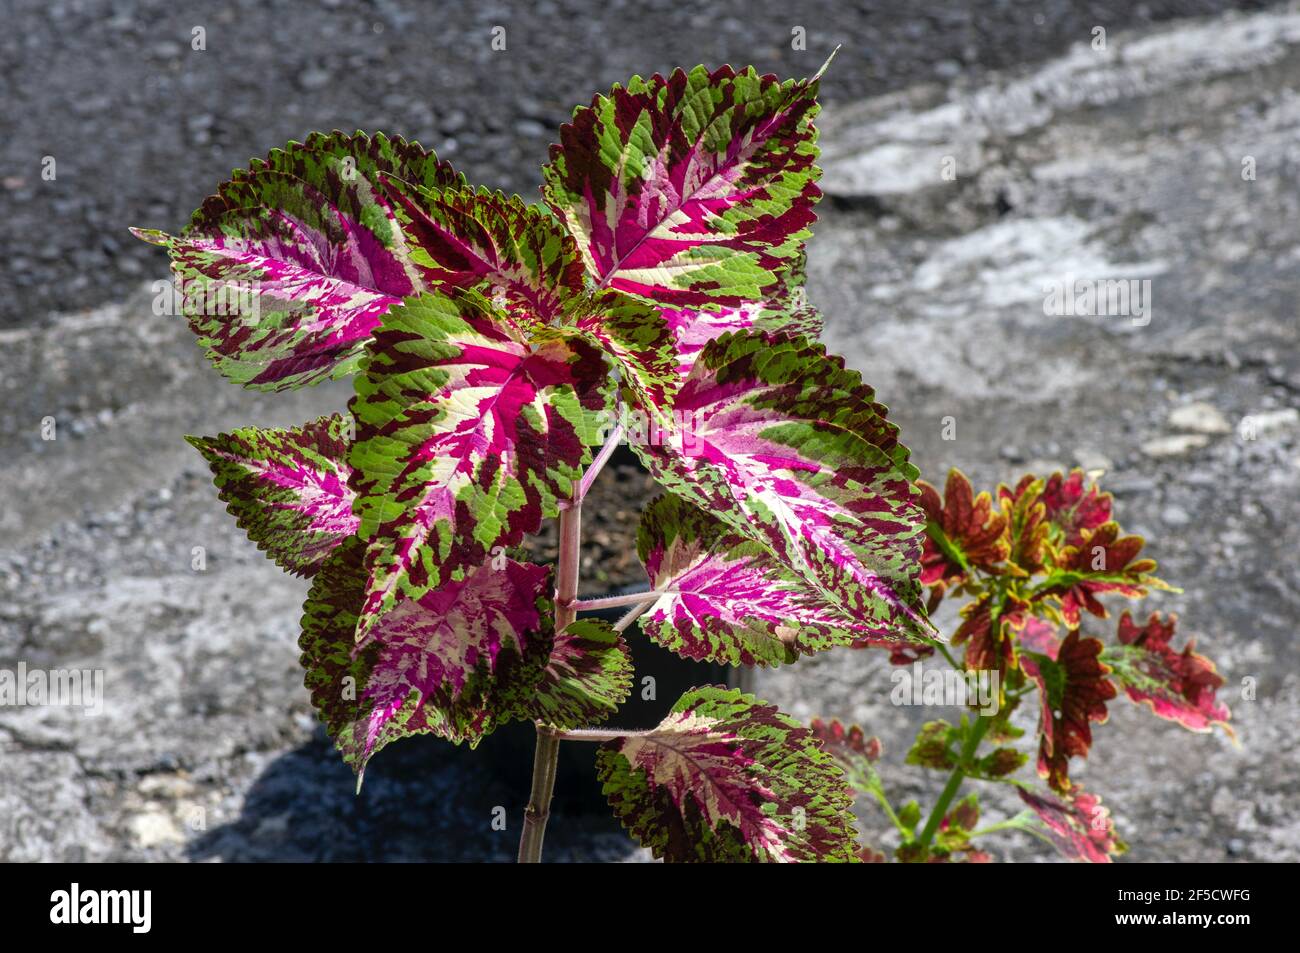 Beautiful leaves of Rex Begonia plant, a colorful houseplant Stock Photo